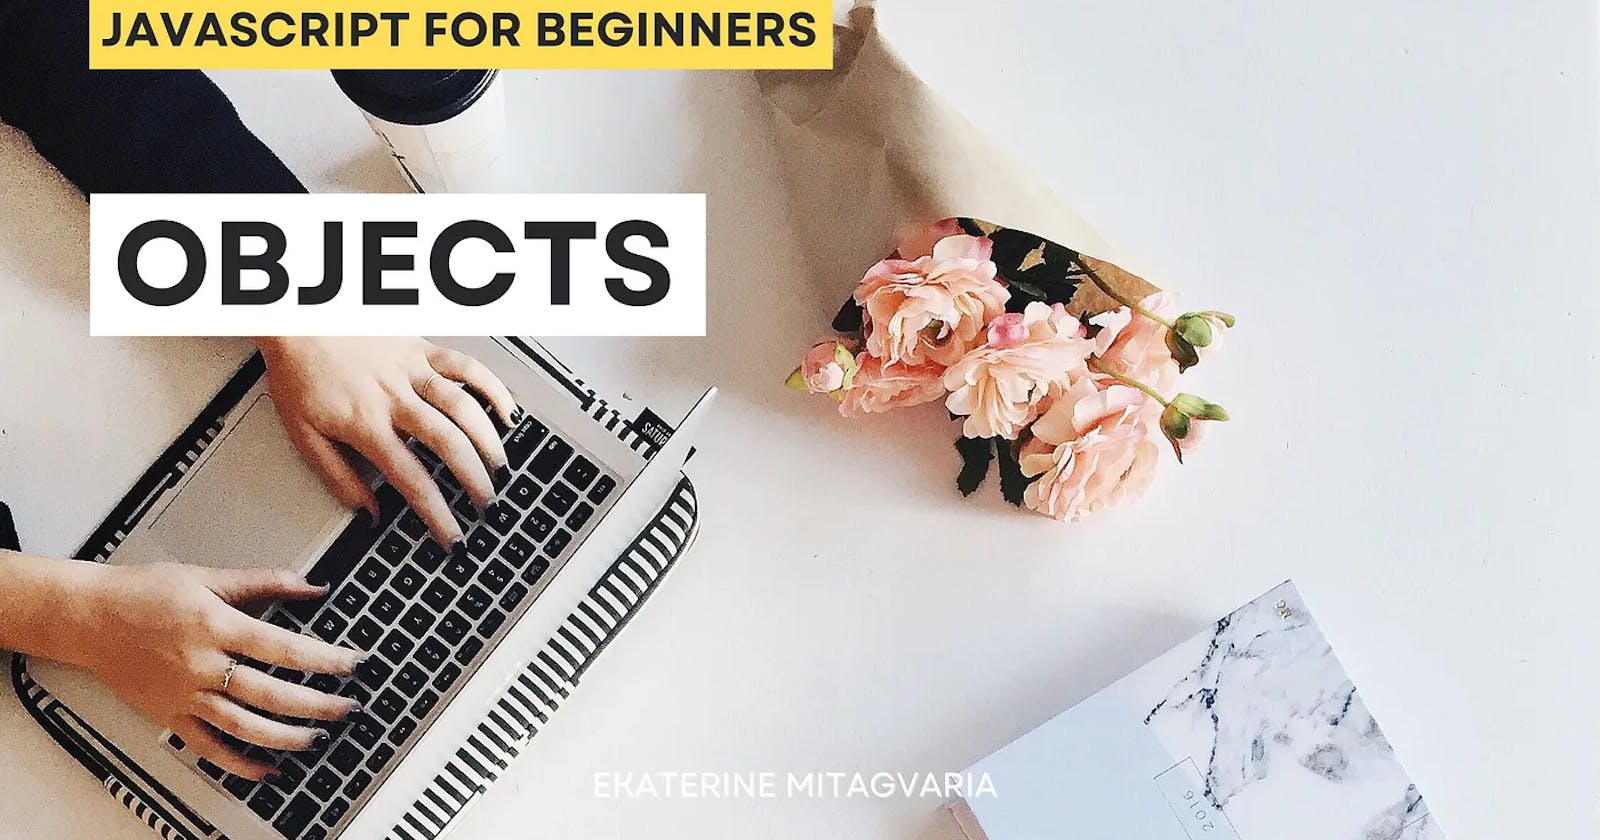 JavaScript for Beginners: Objects